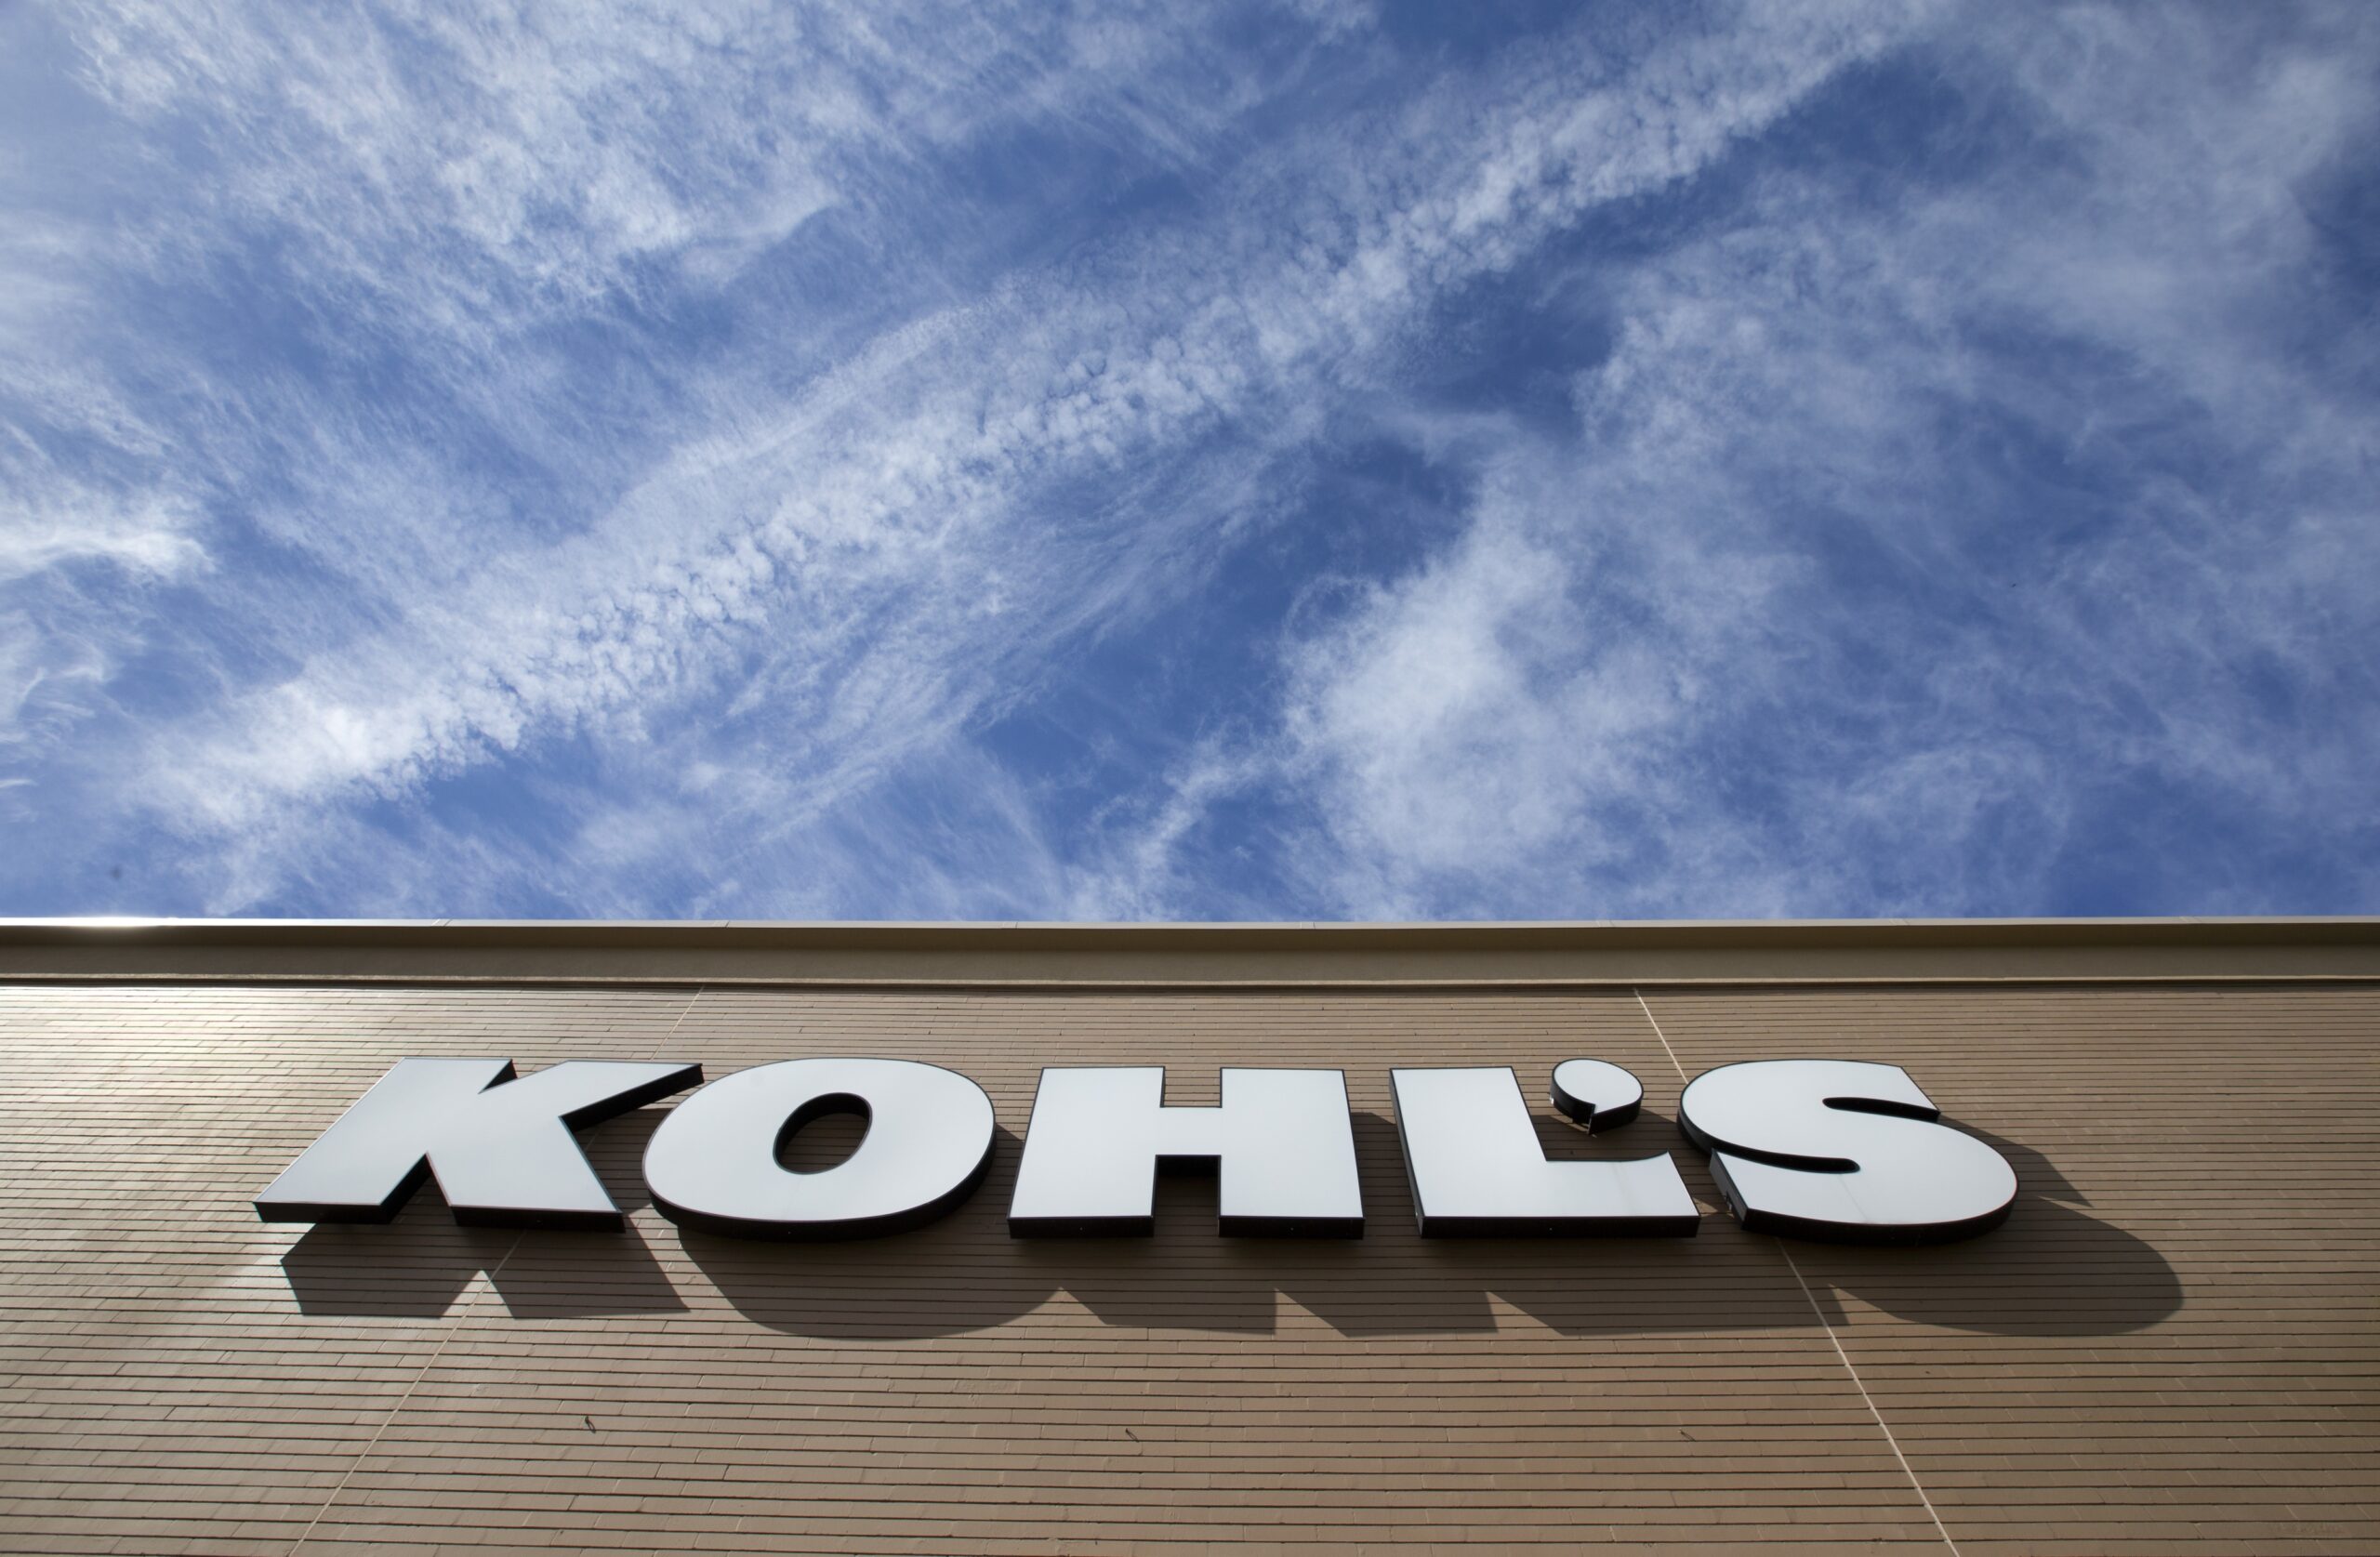 Private equity firms want to buy Kohl’s. Analysts say it could spell disaster for the Wisconsin company